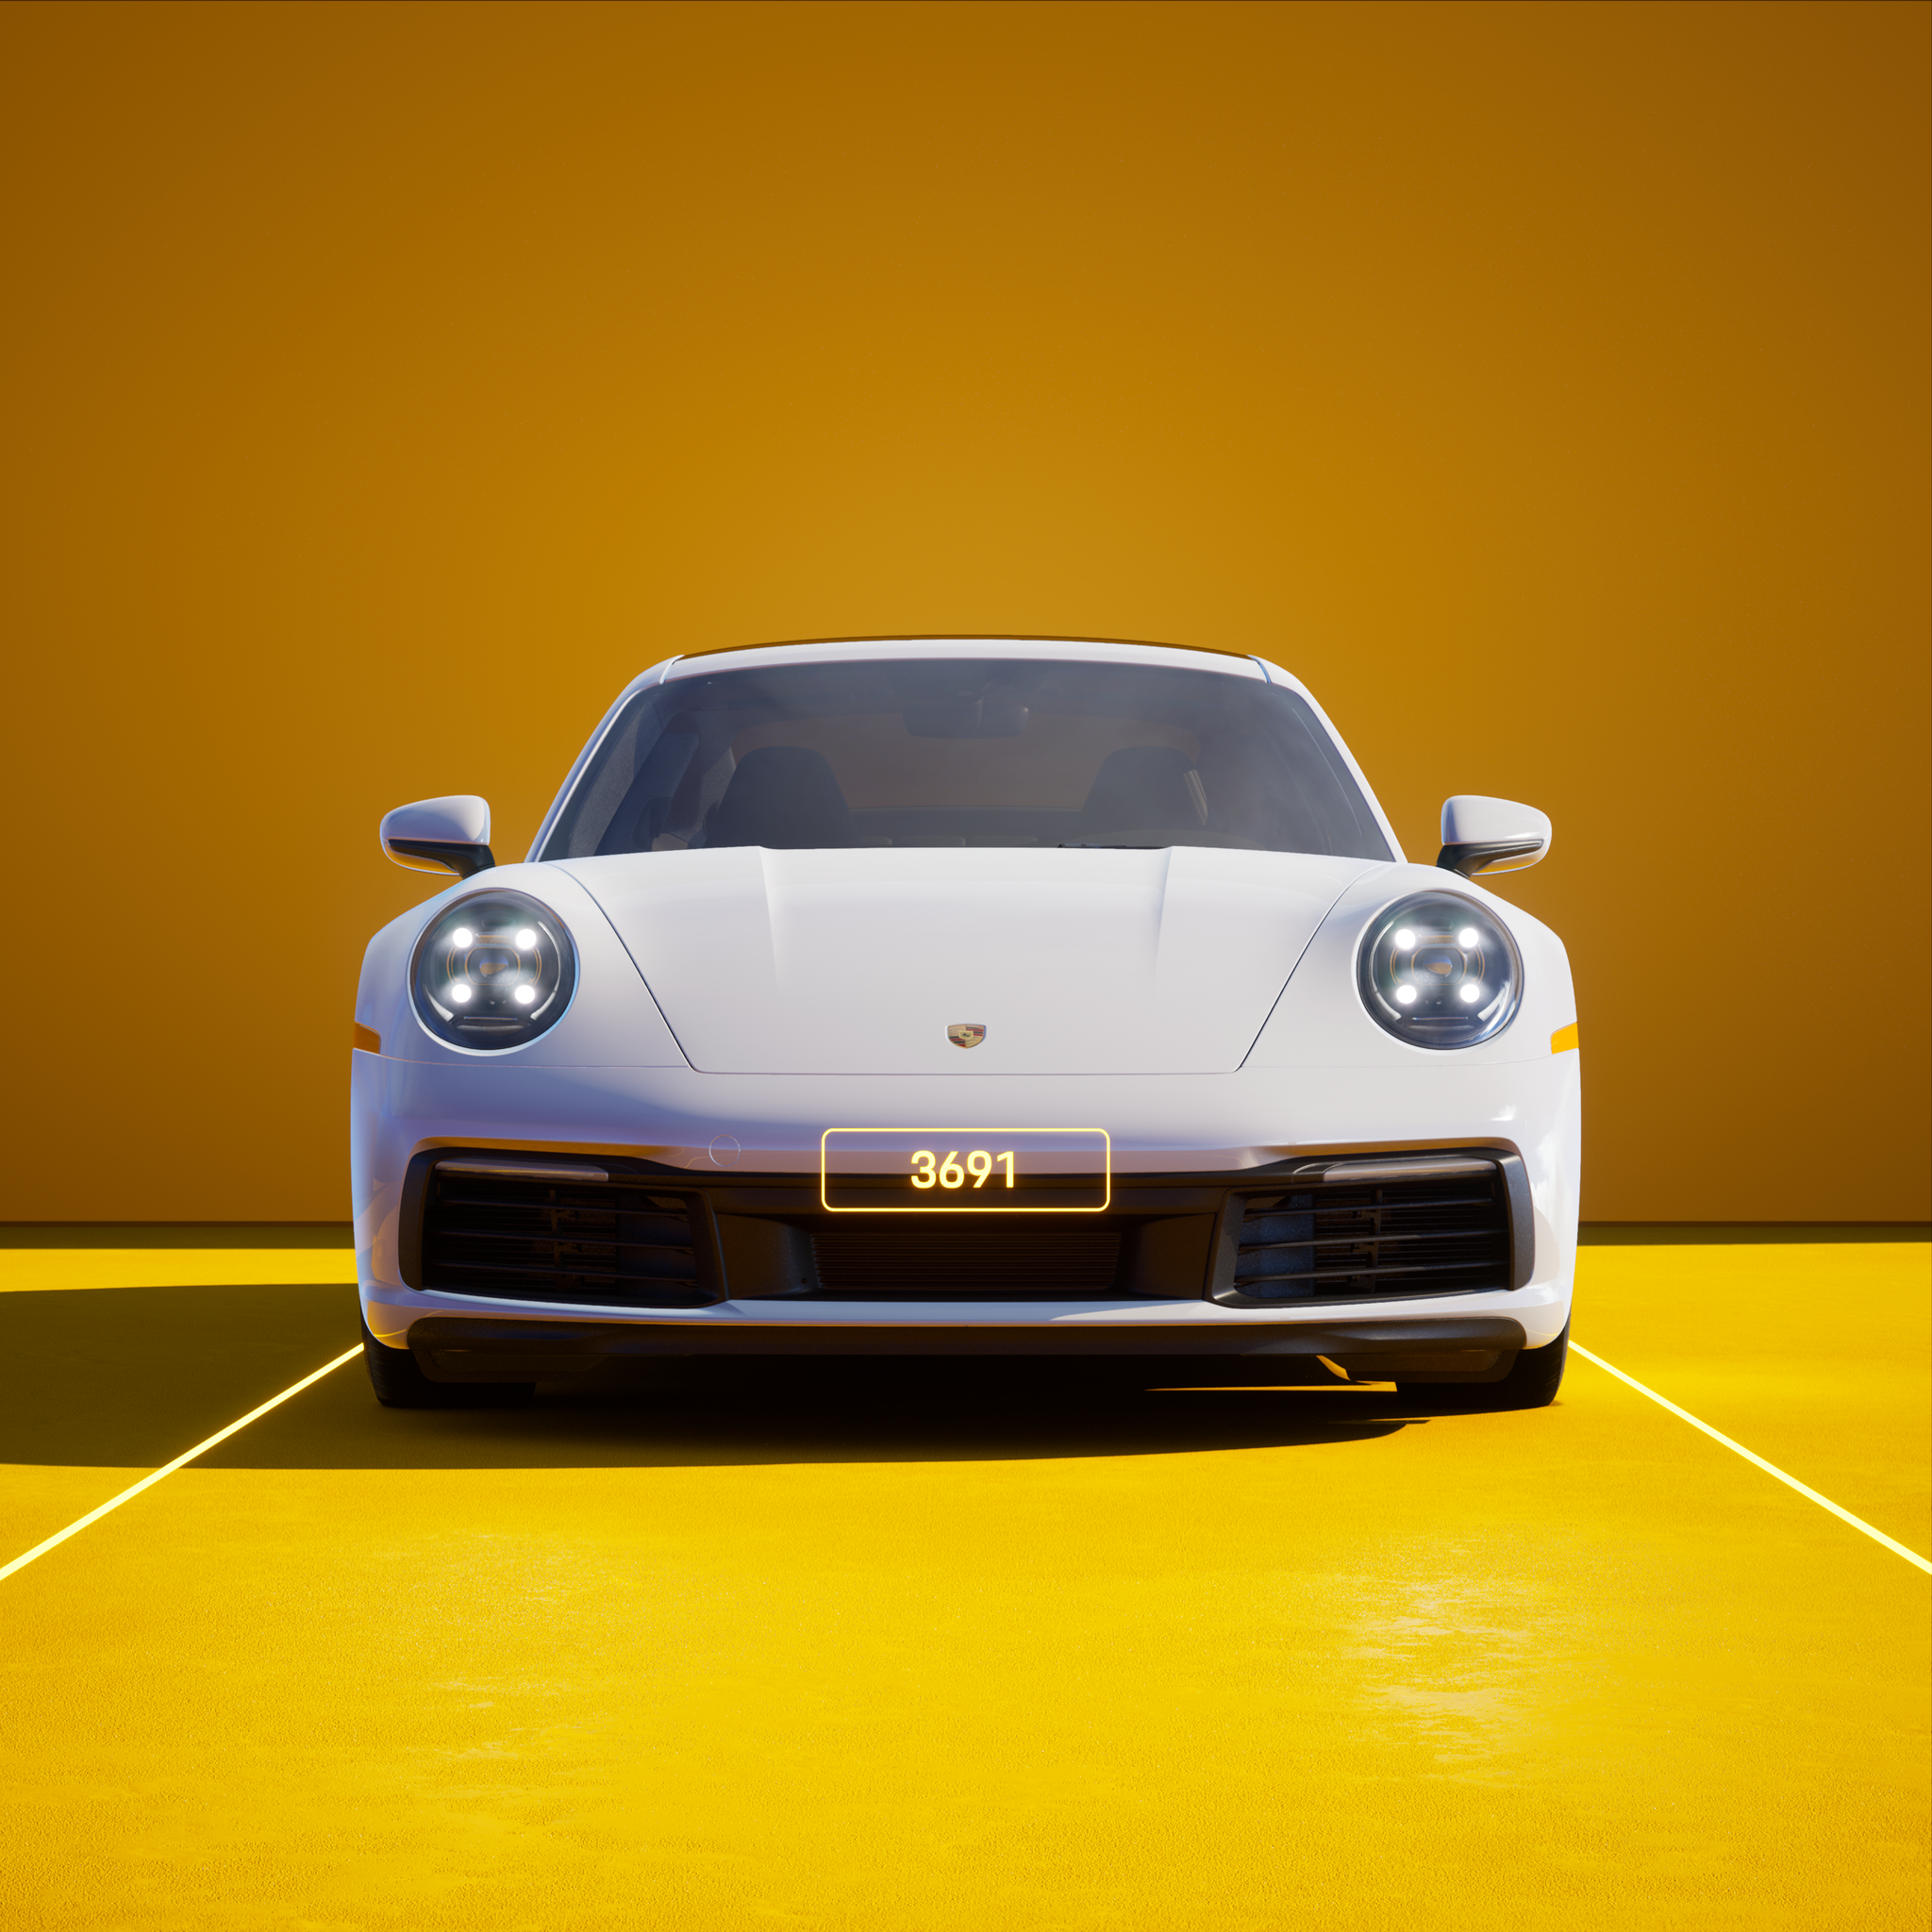 The PORSCHΞ 911 3691 image in phase